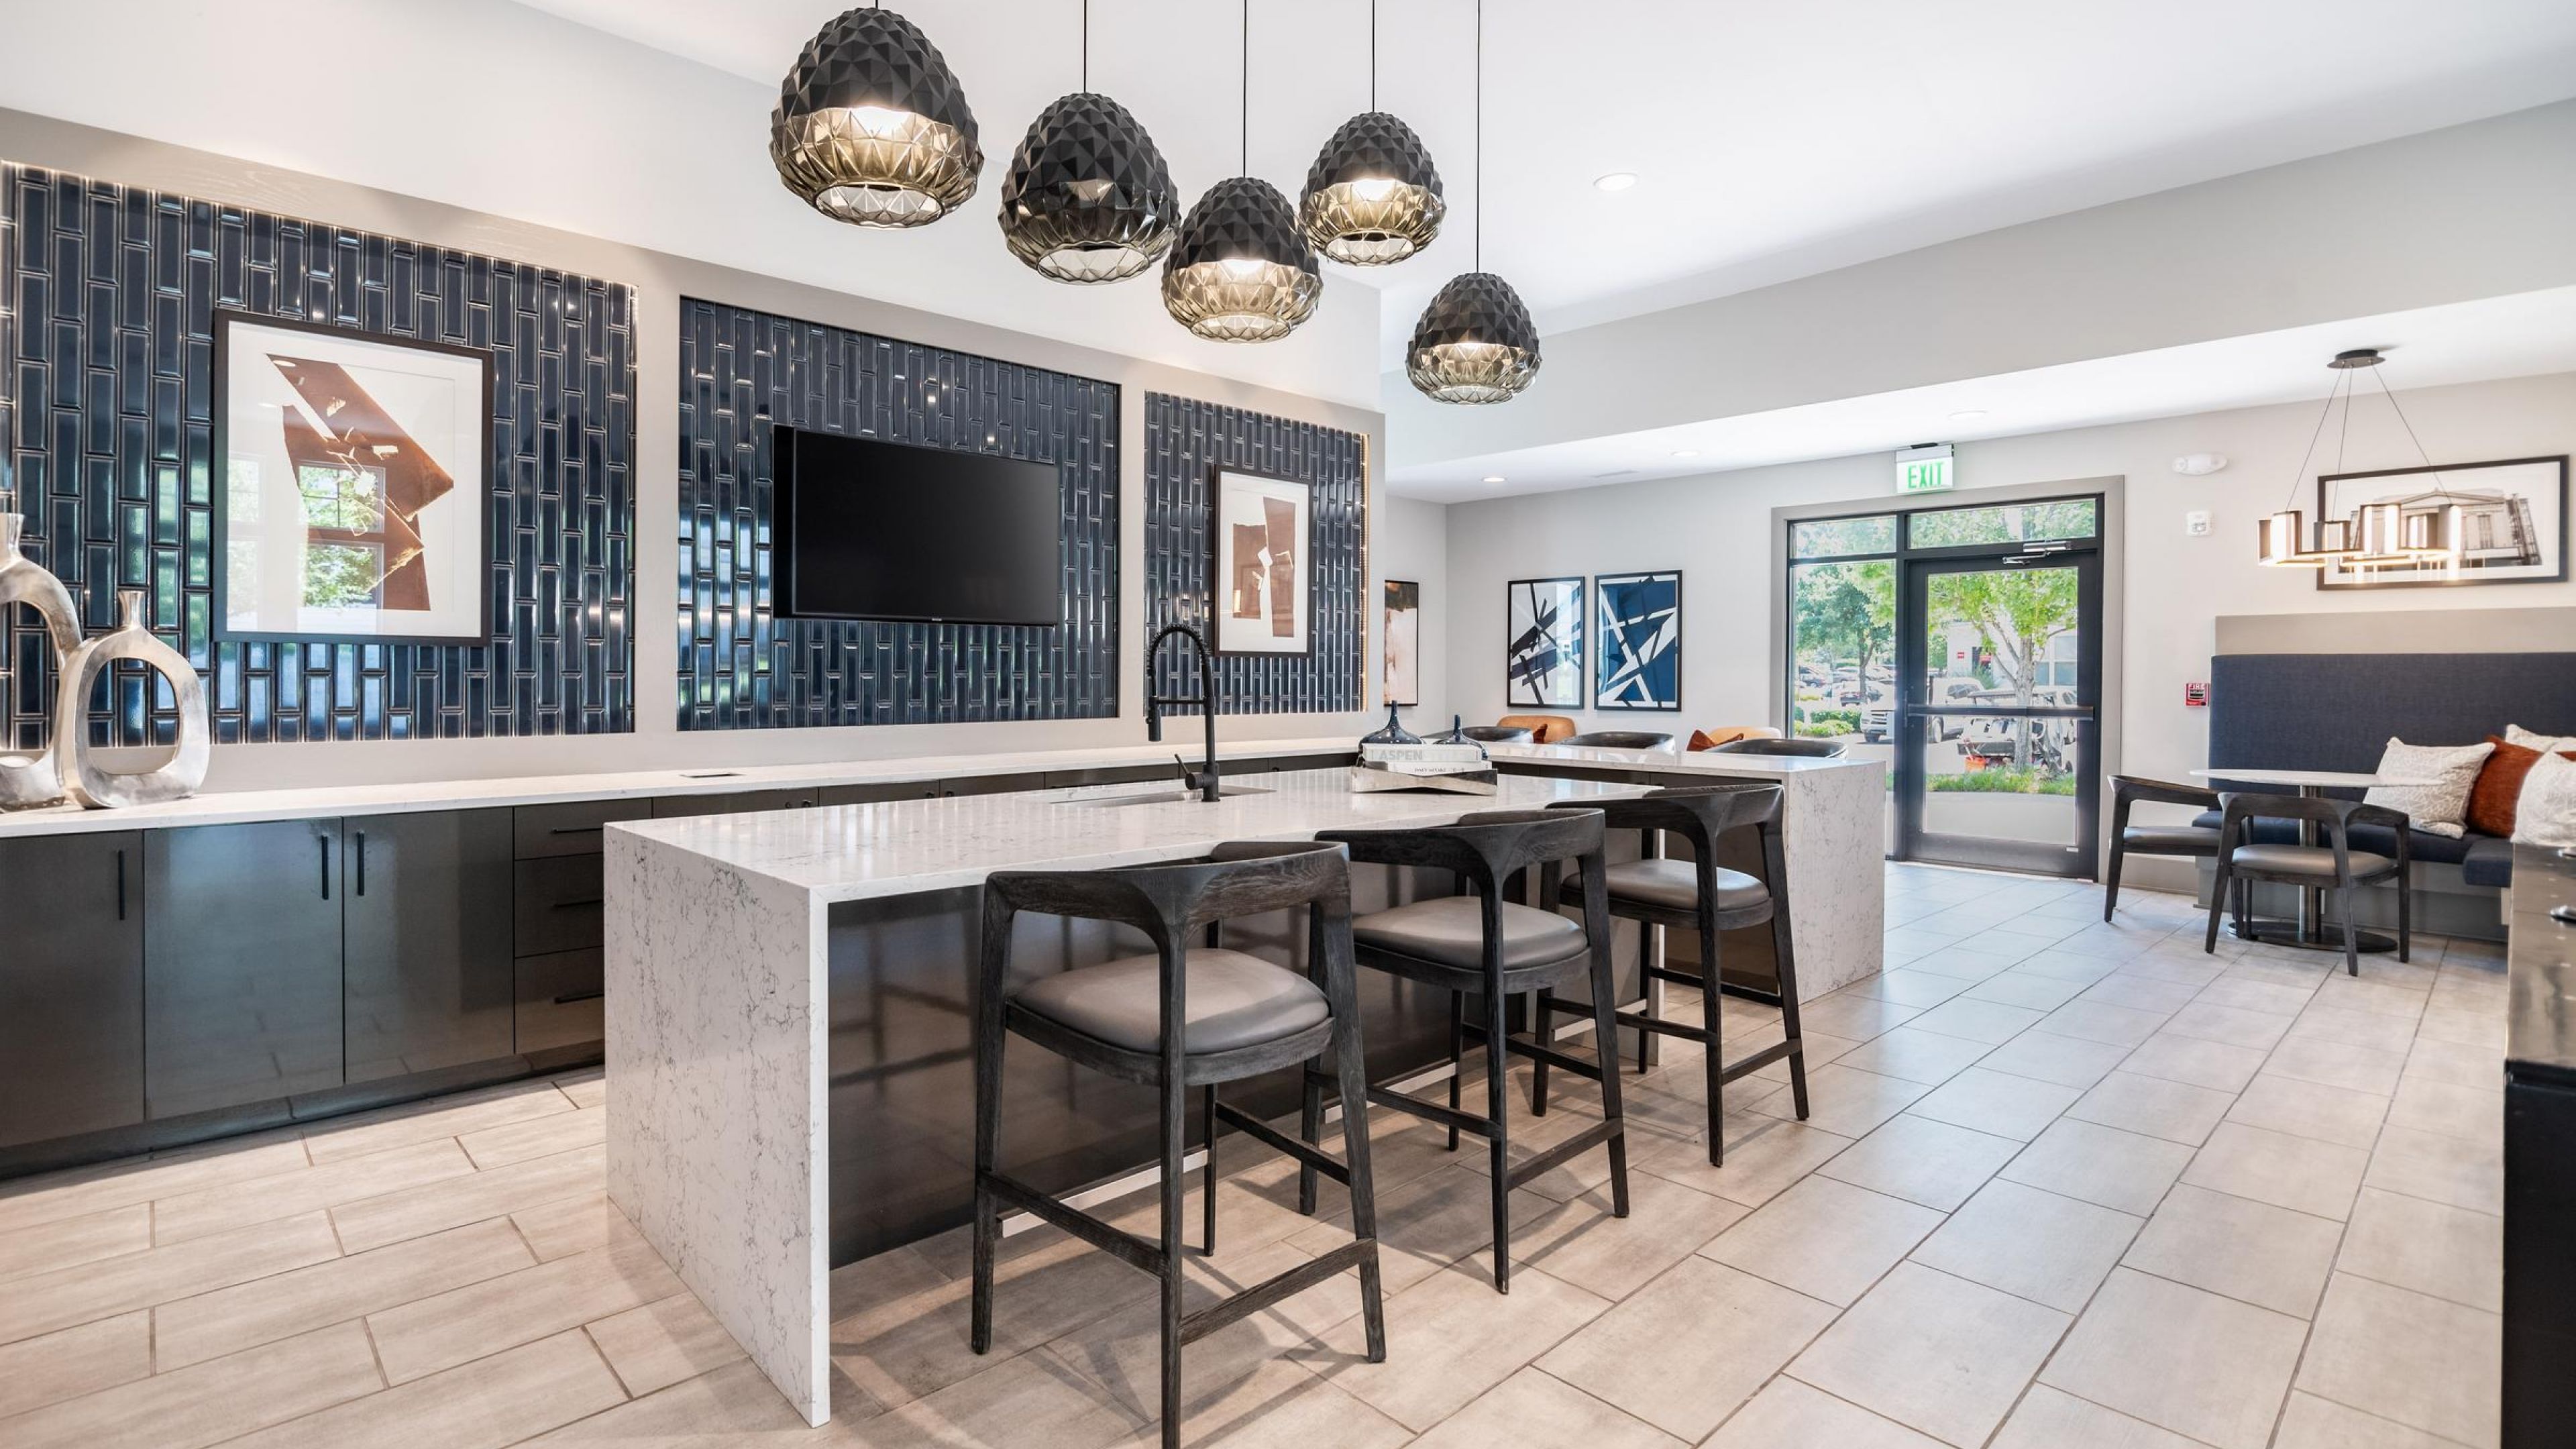 Hawthorne Davis Park apartment social kitchen area with modern bar style seating and a tv mounted on the wall